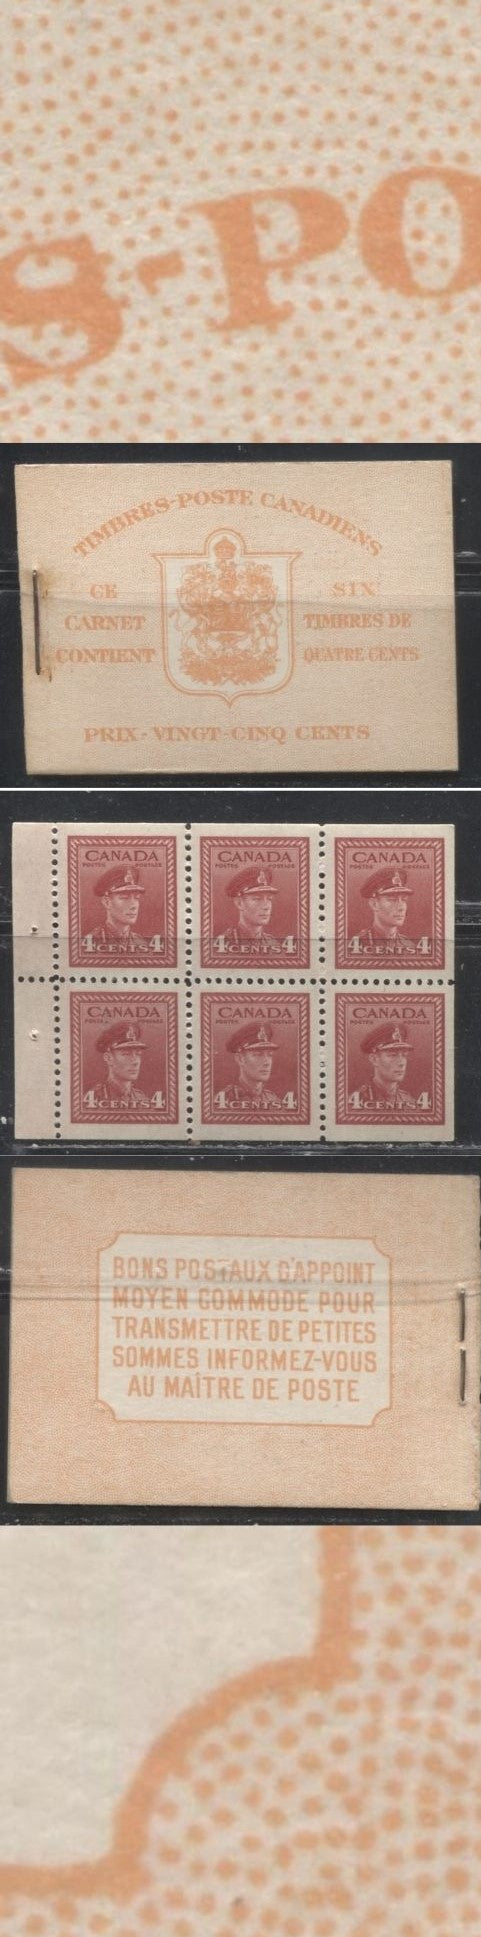 Lot 86 Canada #BK36d 1942-1949 War Issue Complete 25c, French Booklet Containing 1 Pane of 6 of 4c Deep Carmine Red, Type II, Harris Front Cover Type IIu , Back Cover Div, 7c & 6c Rate Page